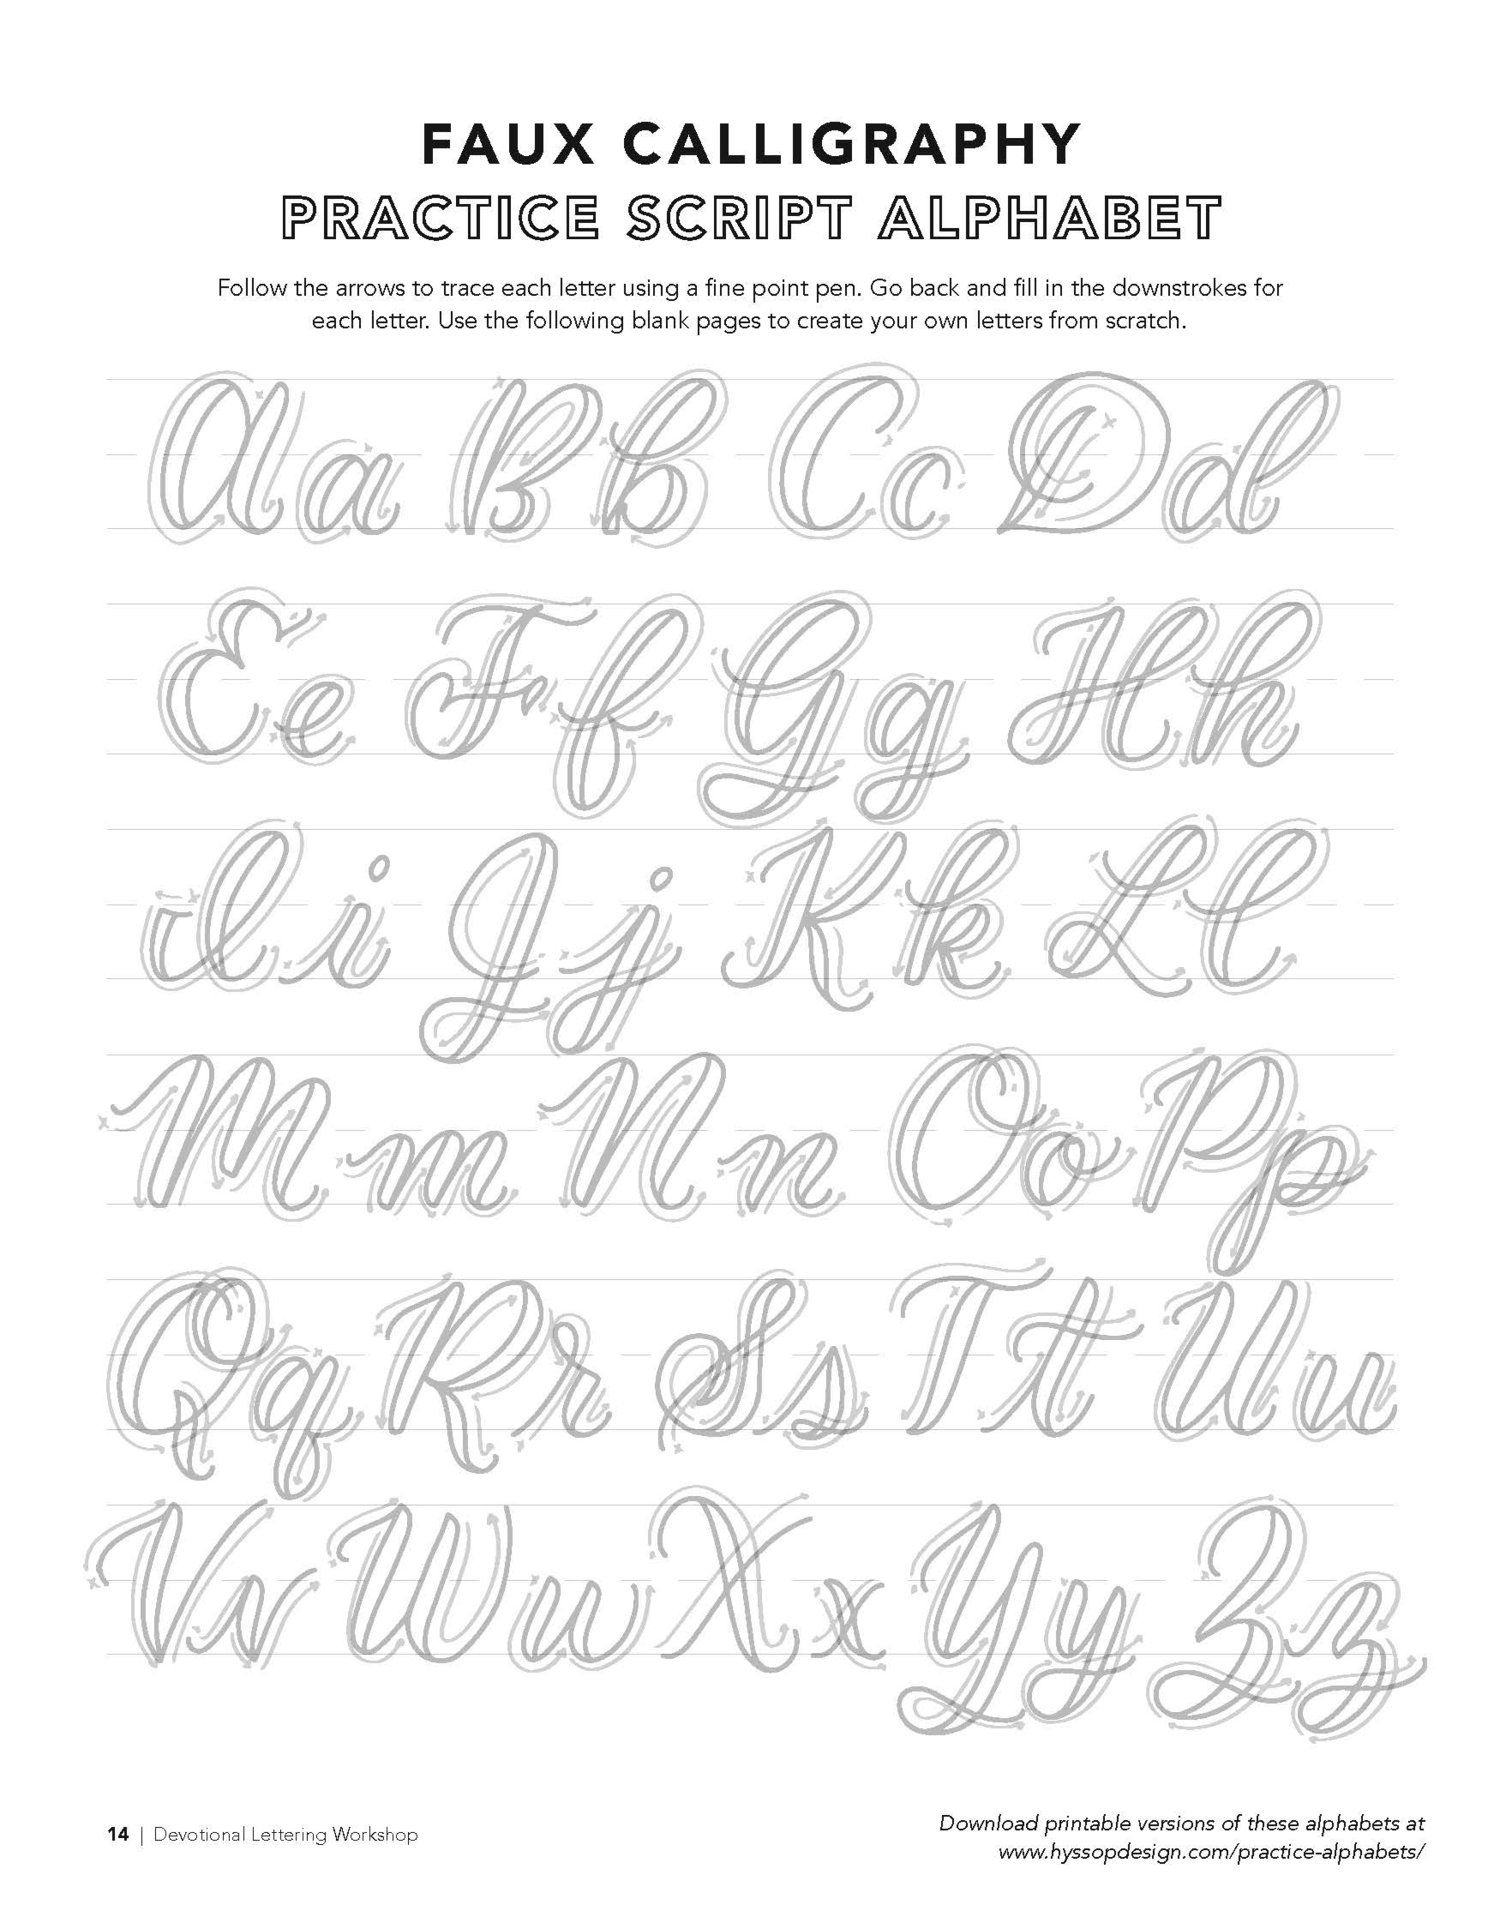 Free Calligraphy Alphabets | Calligraphy Alphabet, Faux for Printable Tracing Letters Make Your Own